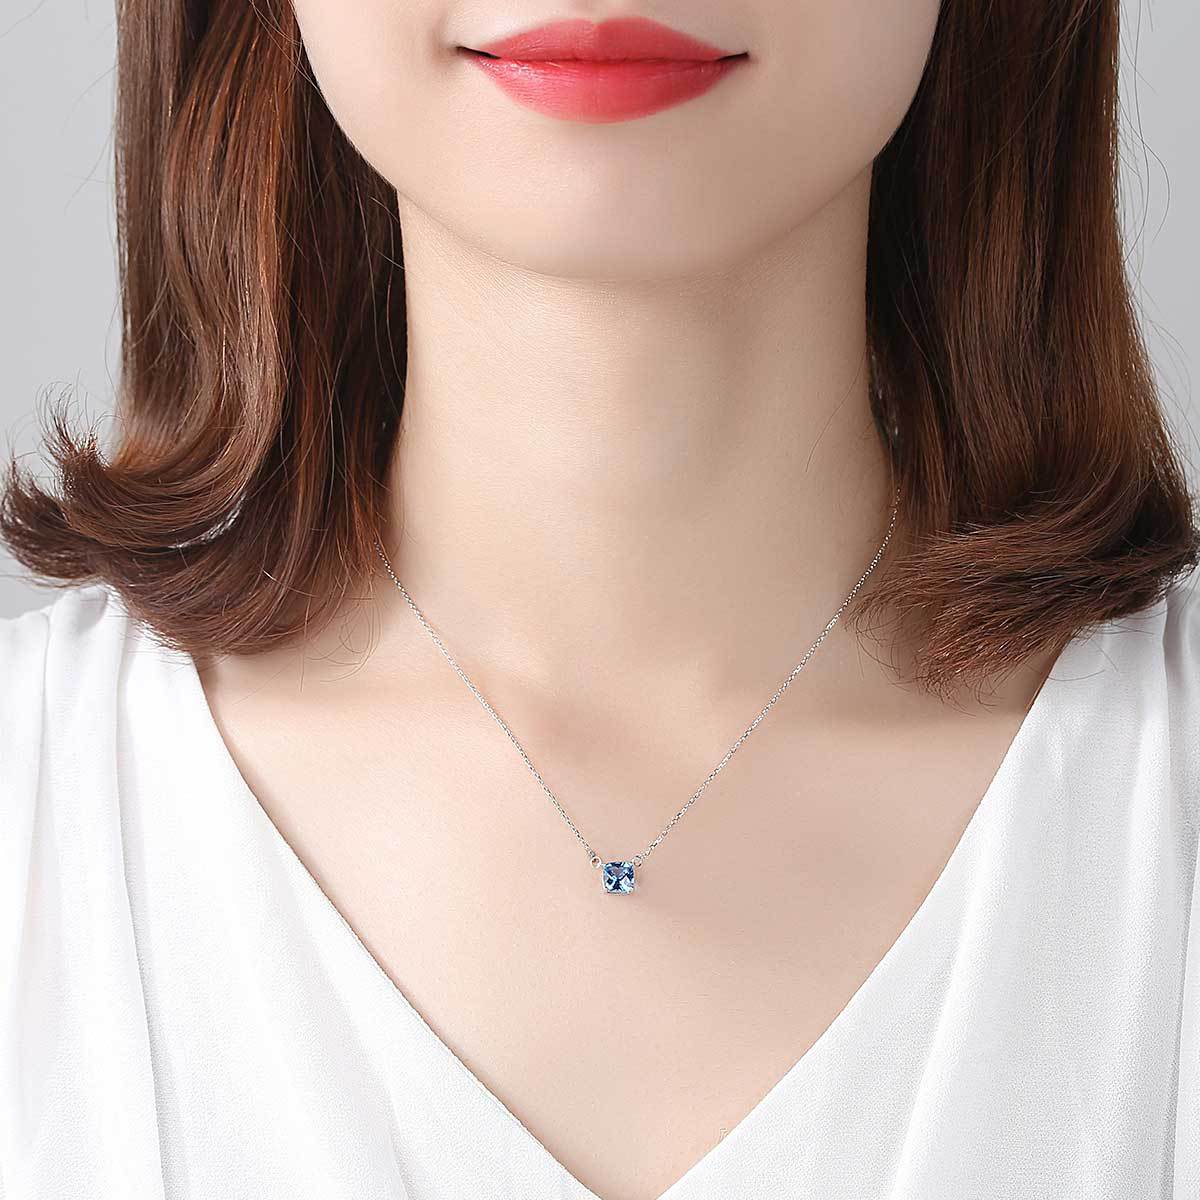 A woman wearing a Maramalive™ Stunning 925 Silver Pendant Blue Crystal Necklace and Pendant Jewelry Set.